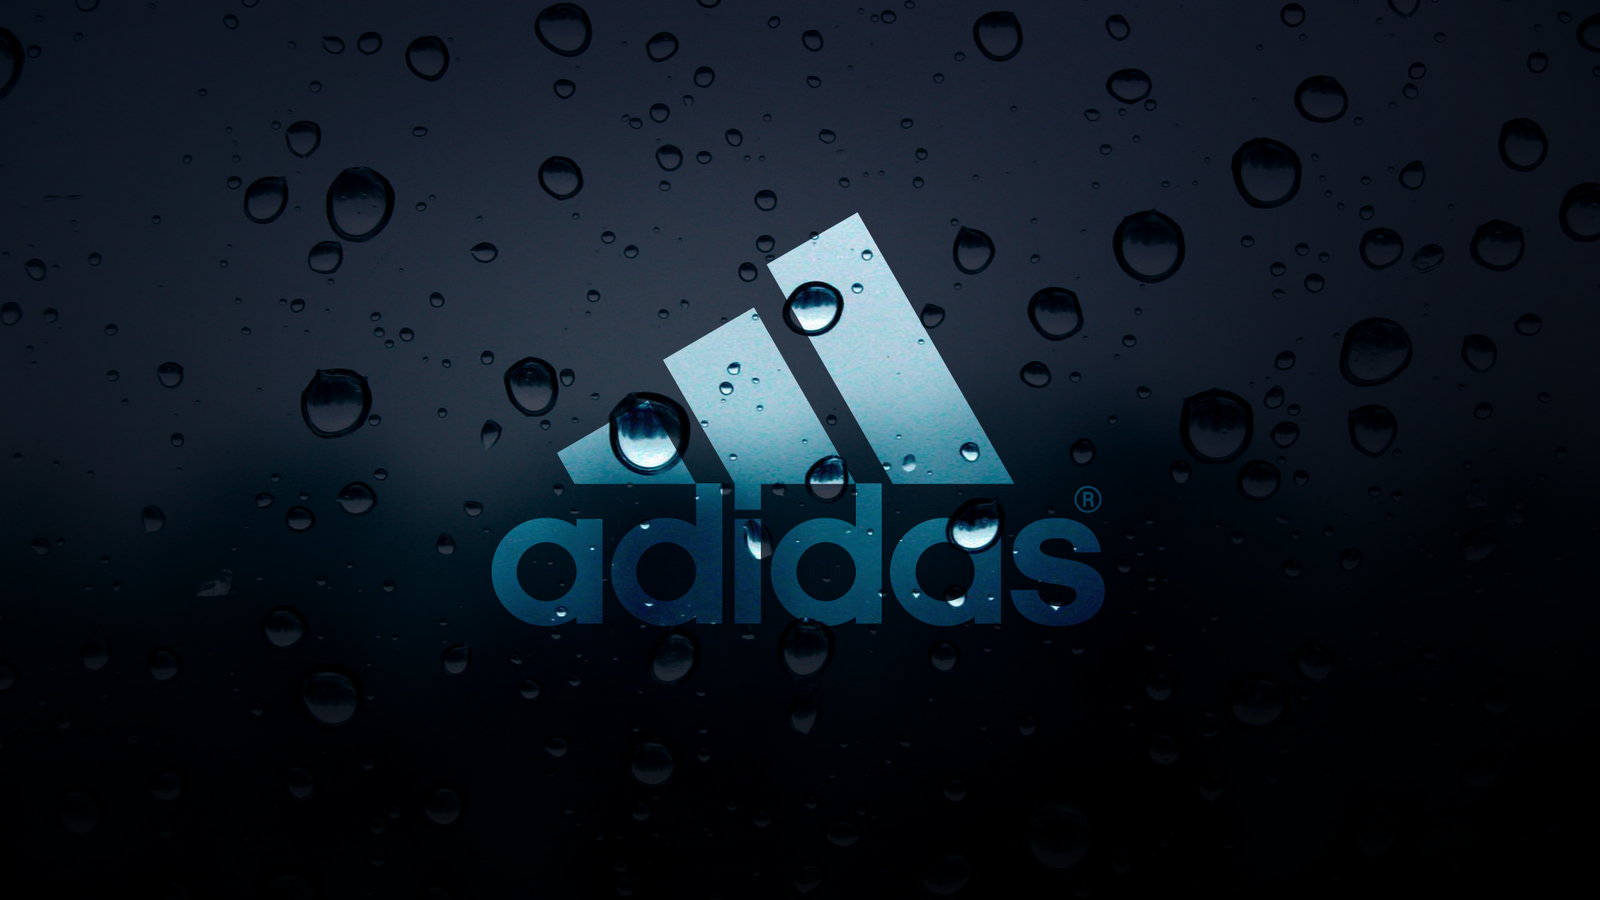 Wallpaper Adidas Best Cars Res